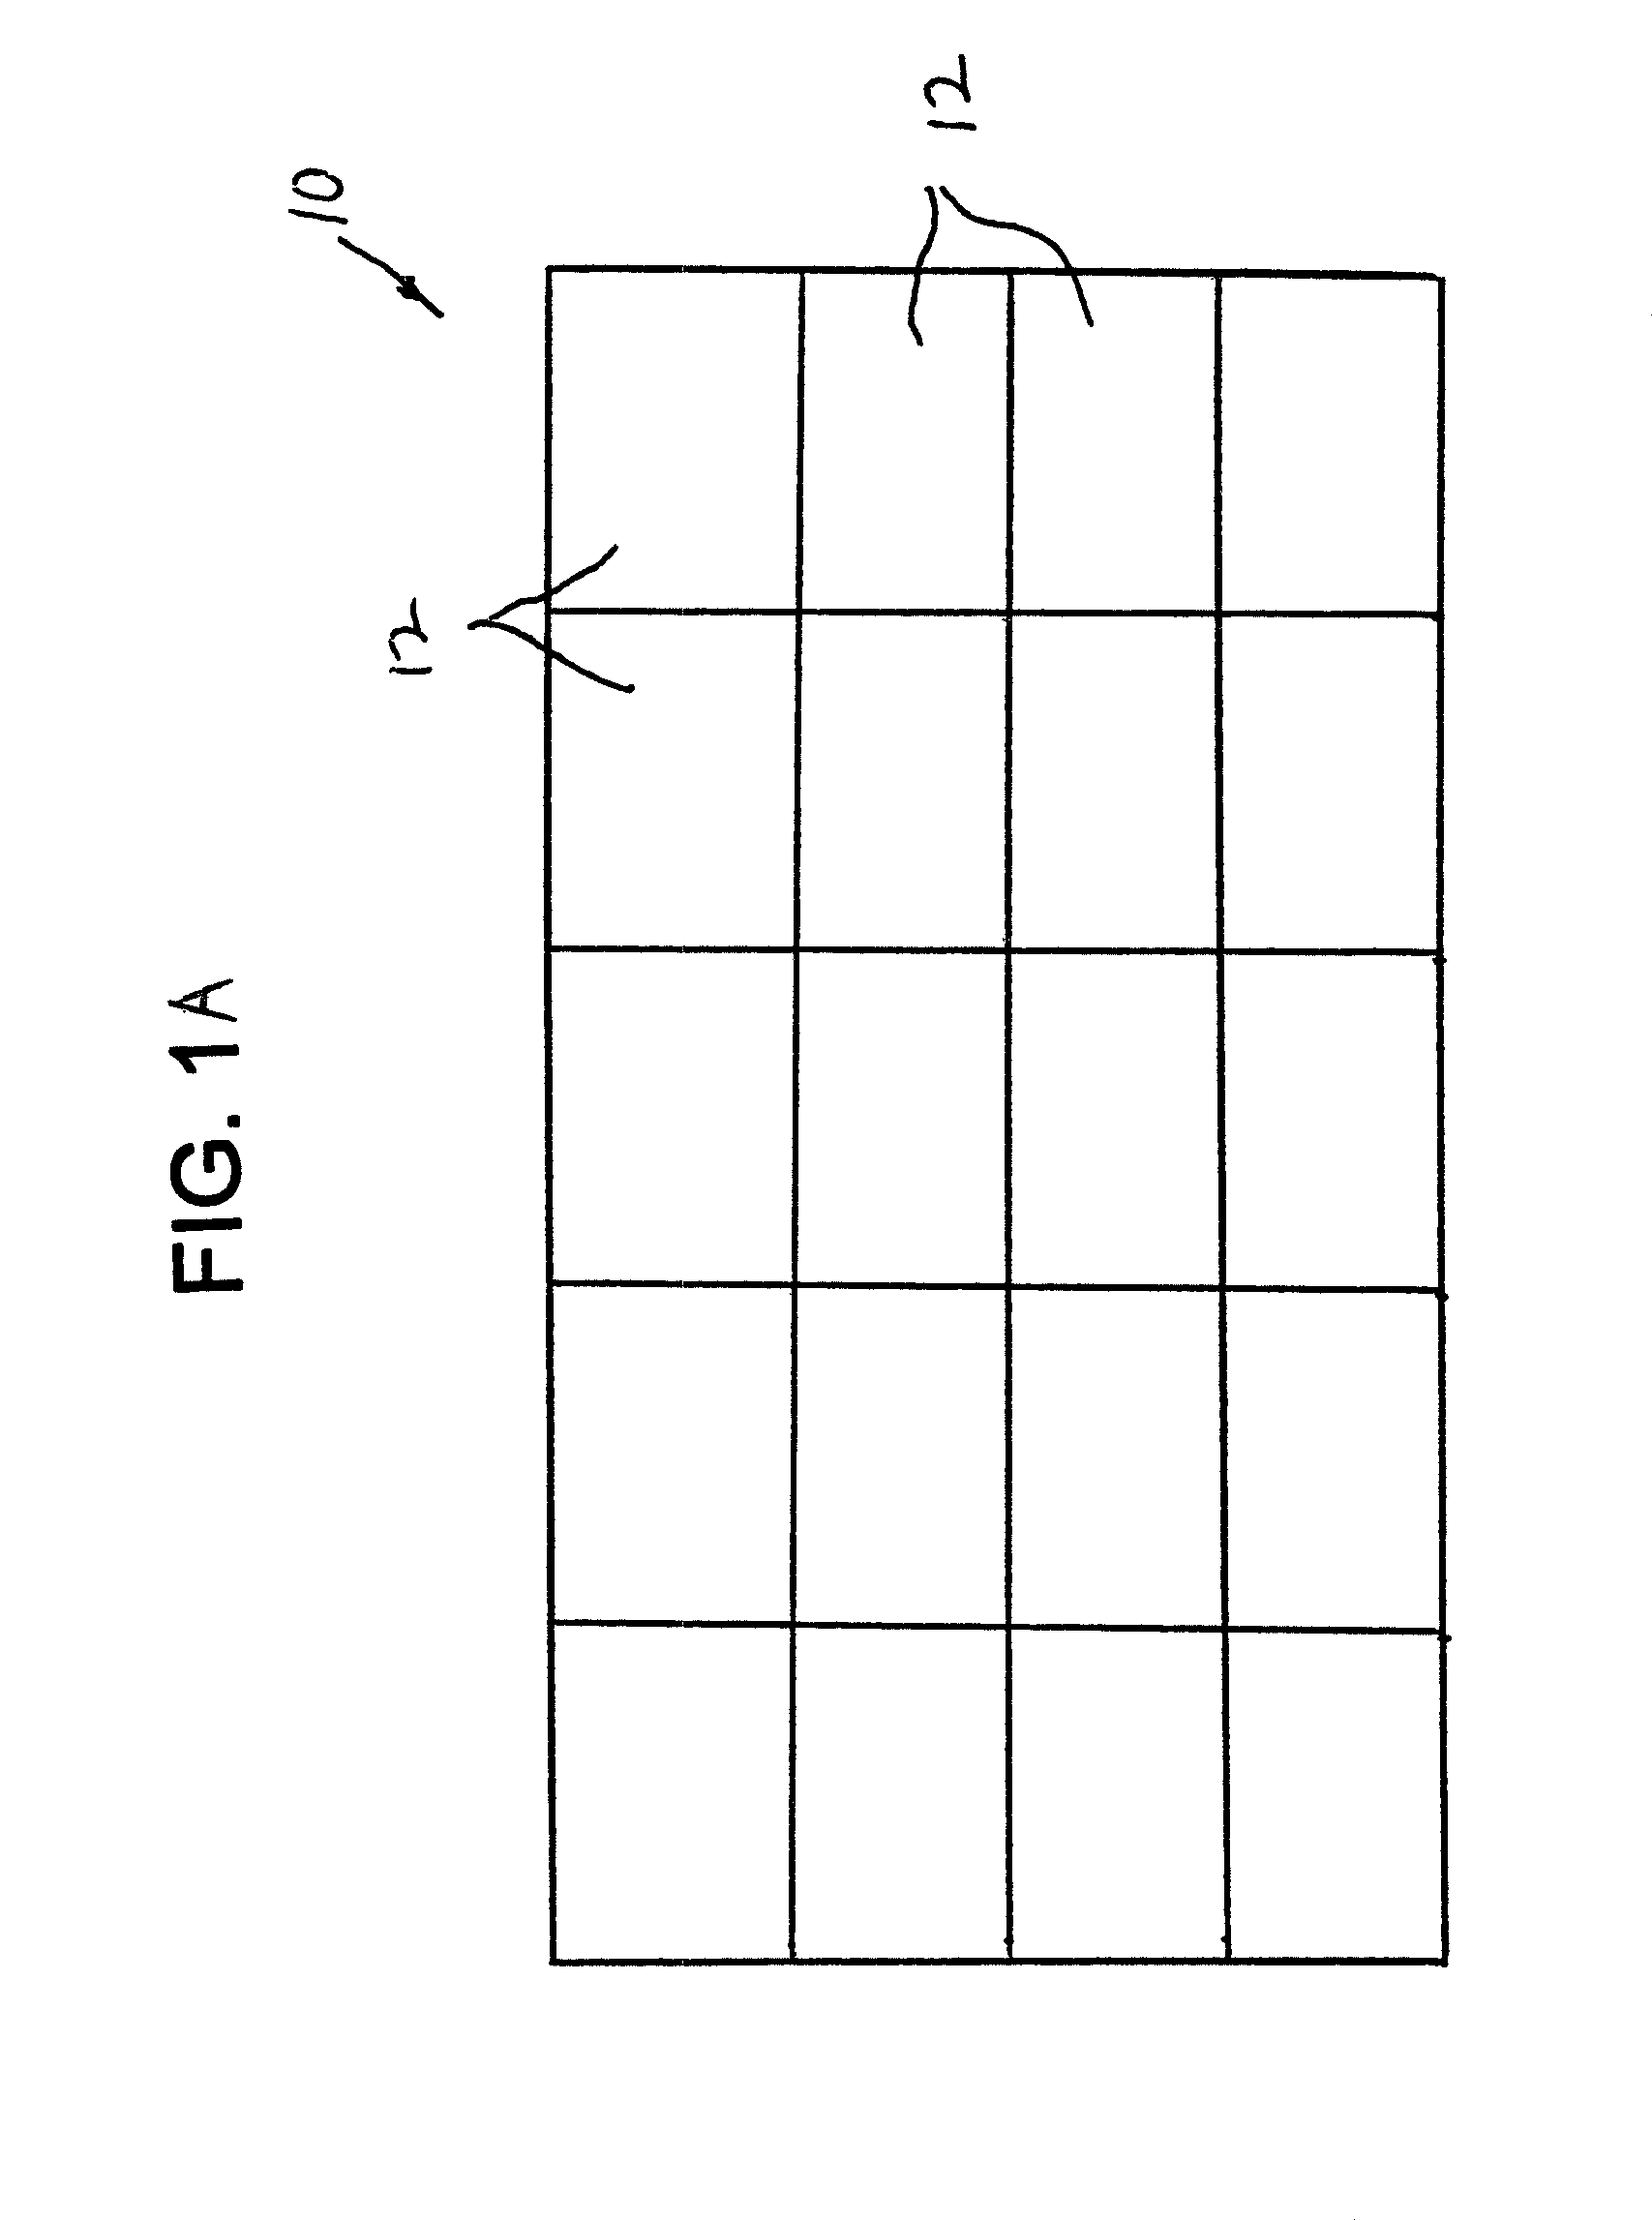 System for mounting wall panels to a wall structure